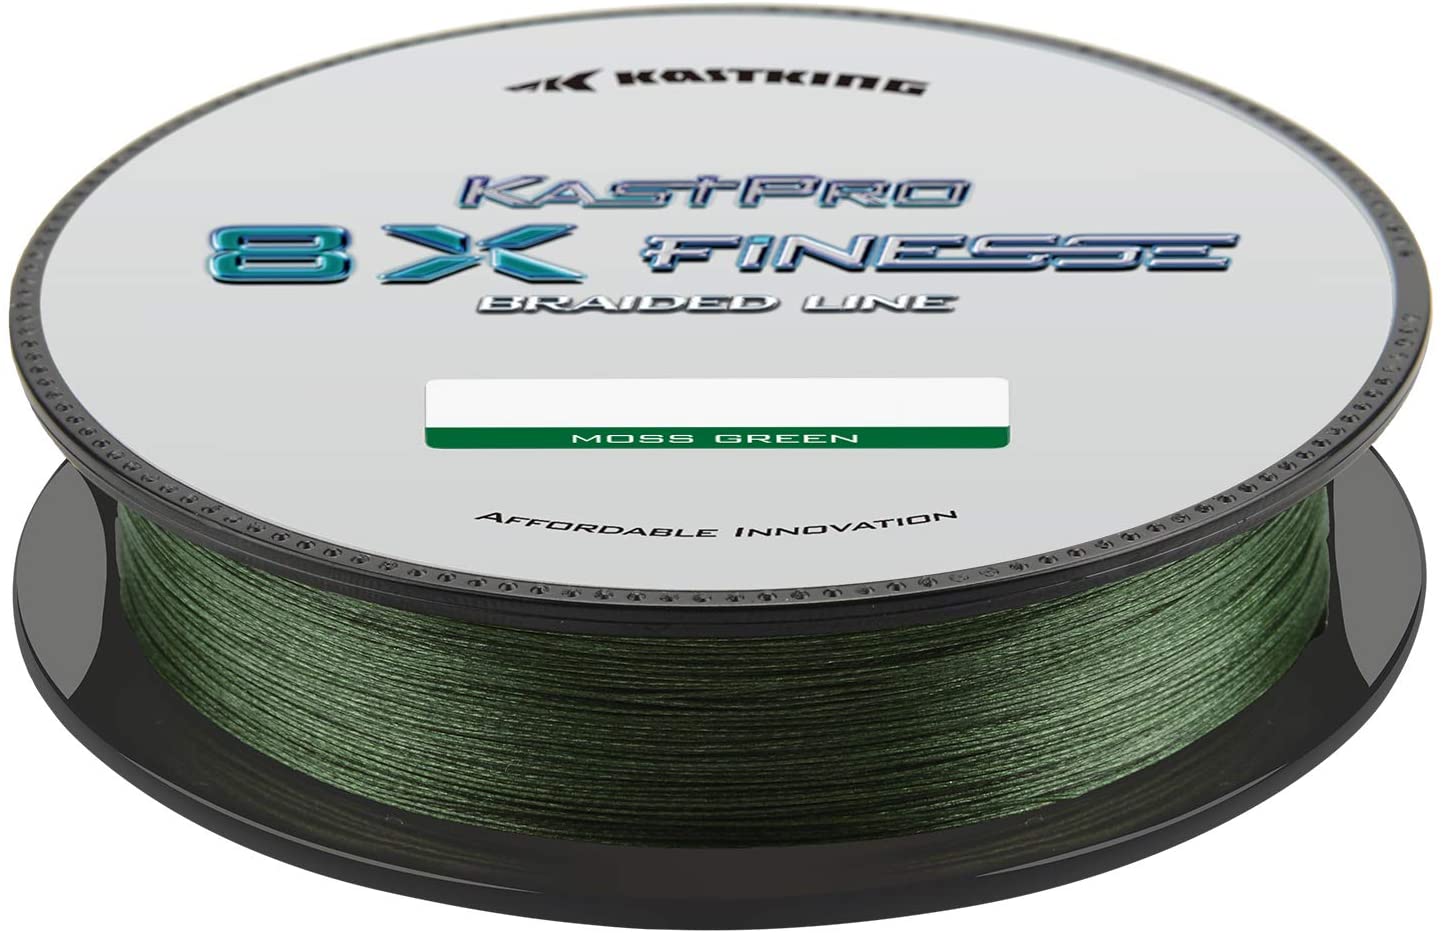 AIMTYD Mega8 Braided Fishing Line, Advanced 8 Strand Braided Line -  Rounder, Stronger, Softer, Smoother, More Sensitive, Casts Farther, Zero  Stretch & Memory, Great Knot Strength, More Color Fast 